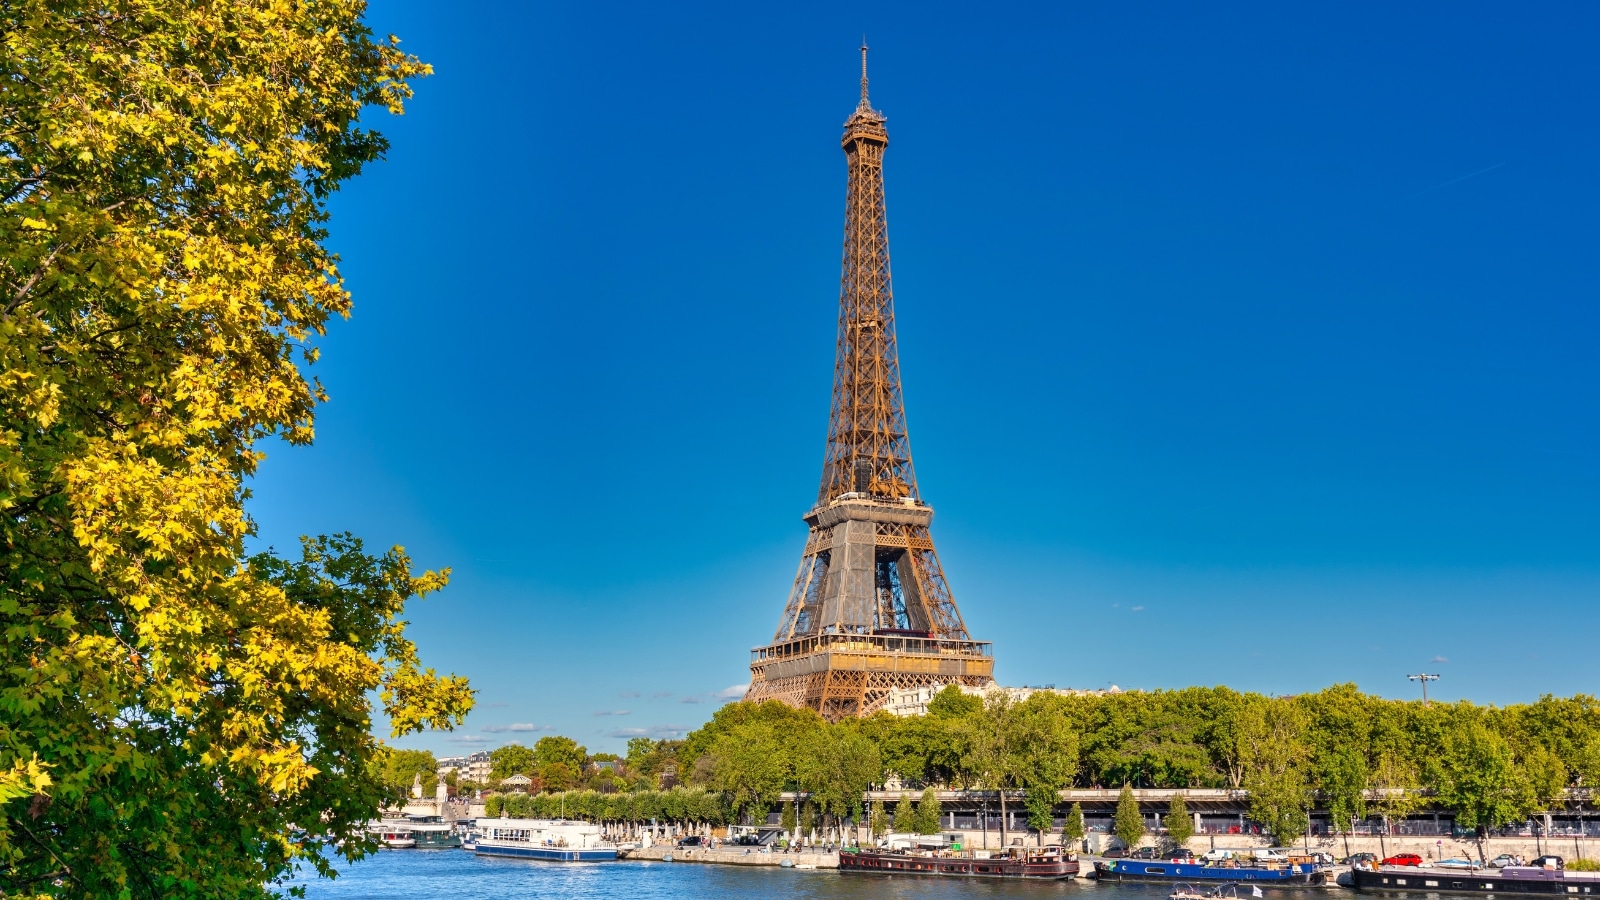 View of the Eiffel Tower in Paris. Rising majestically against the Parisian skyline, the iron lattice structure. It